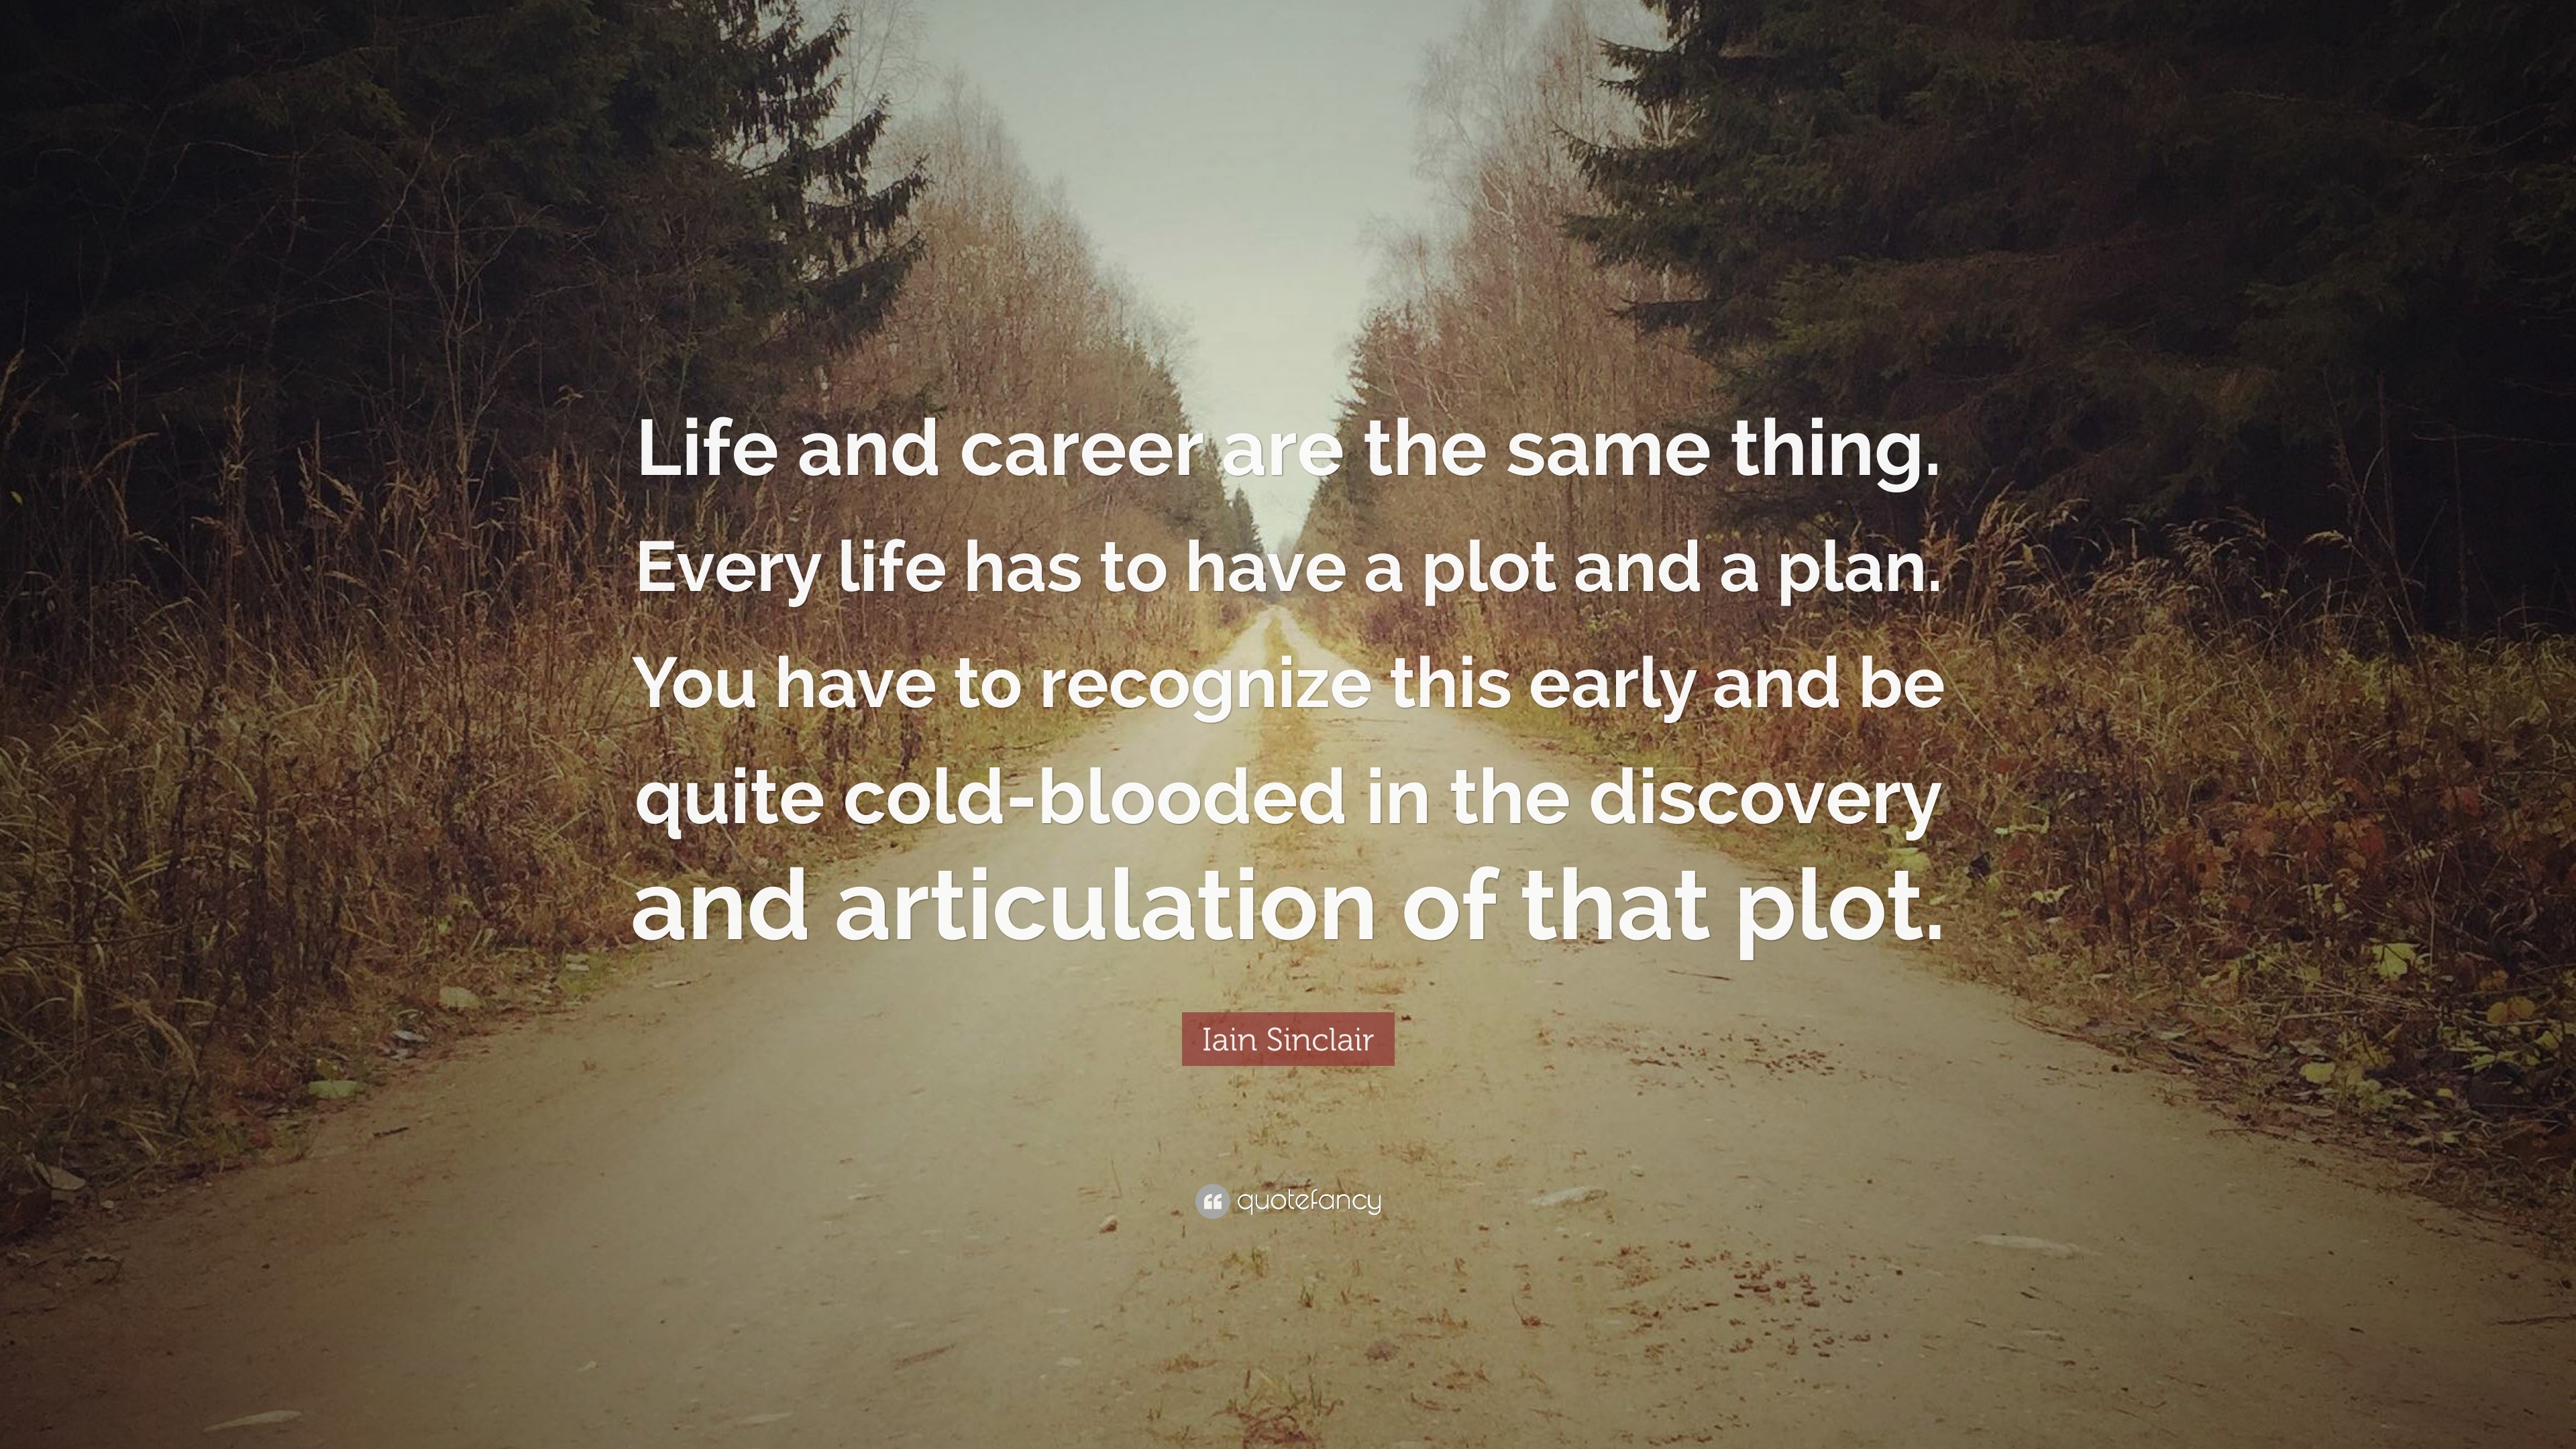 Iain Sinclair Quote “life And Career Are The Same Thing Every Life Has To Have A Plot And A